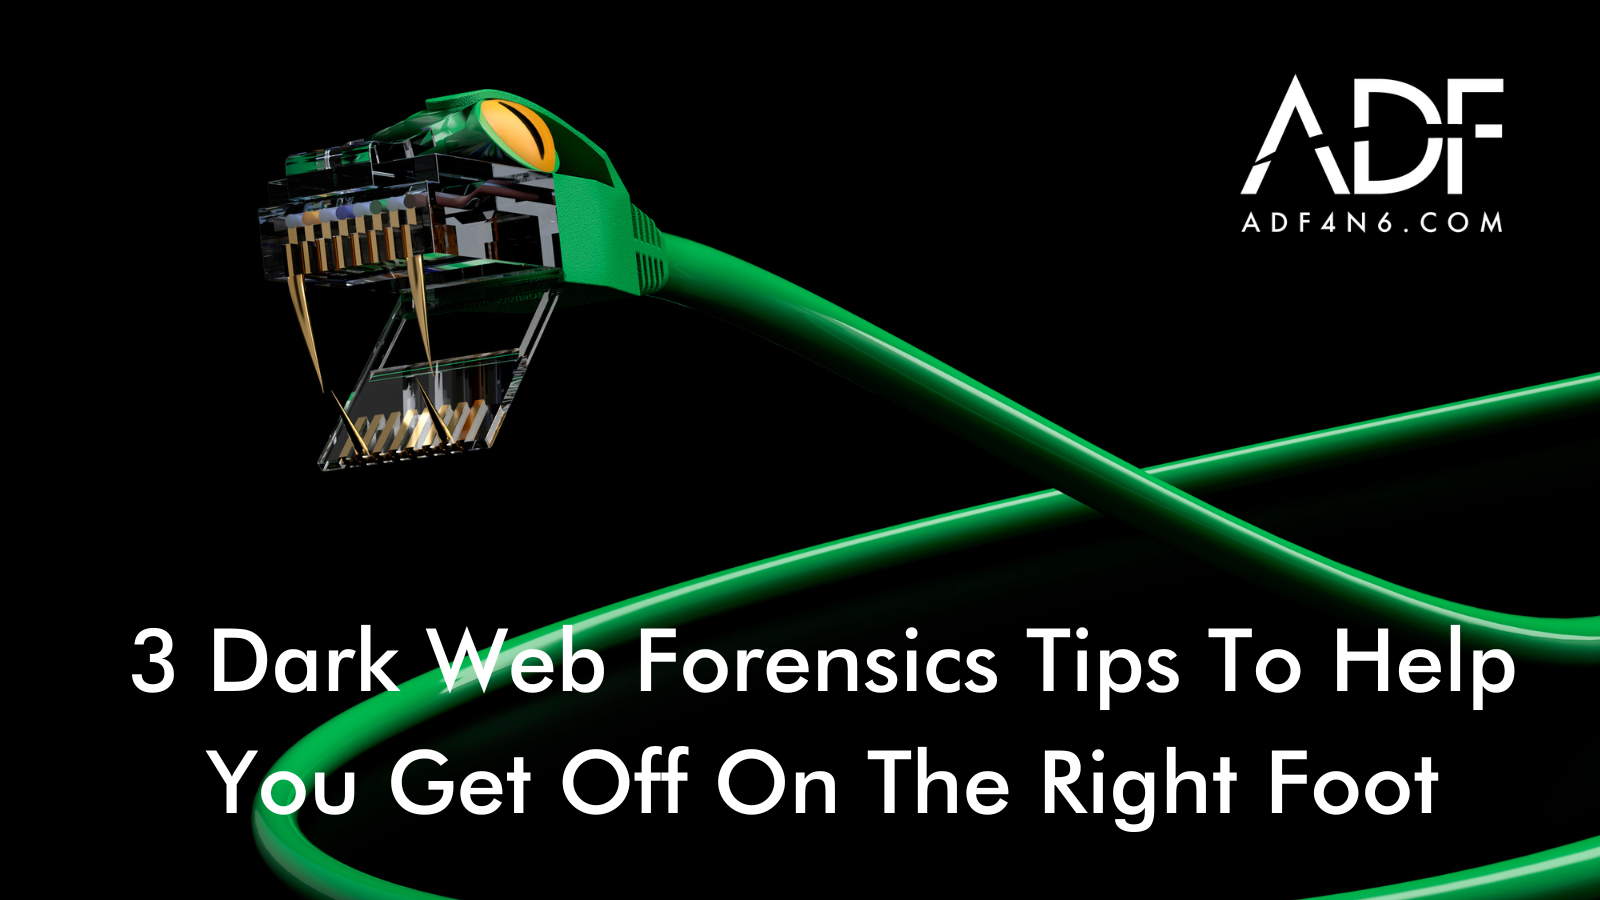 3 Dark Web Forensics Tips To Help You Get Off On The Right Foot